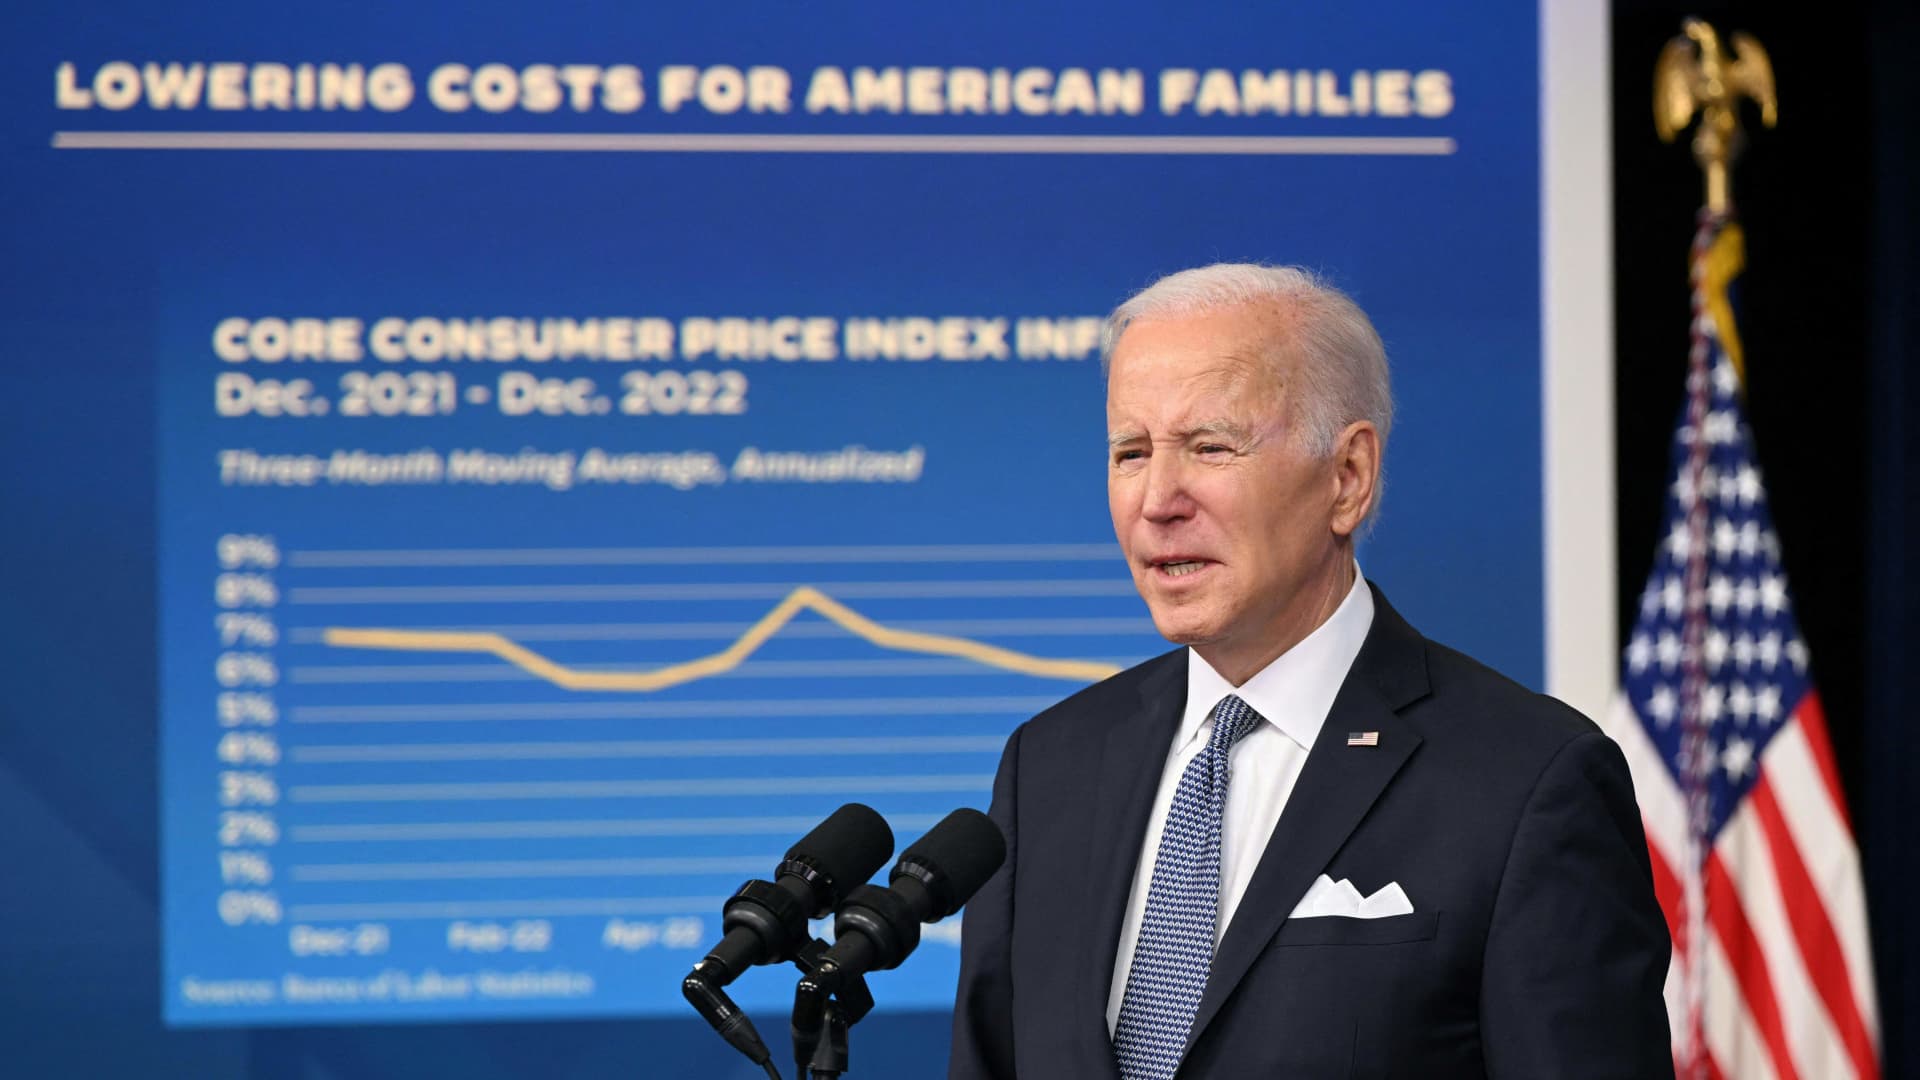 Biden says inflation slowdown shows it’s ‘clearer than ever’ his economic policies are working